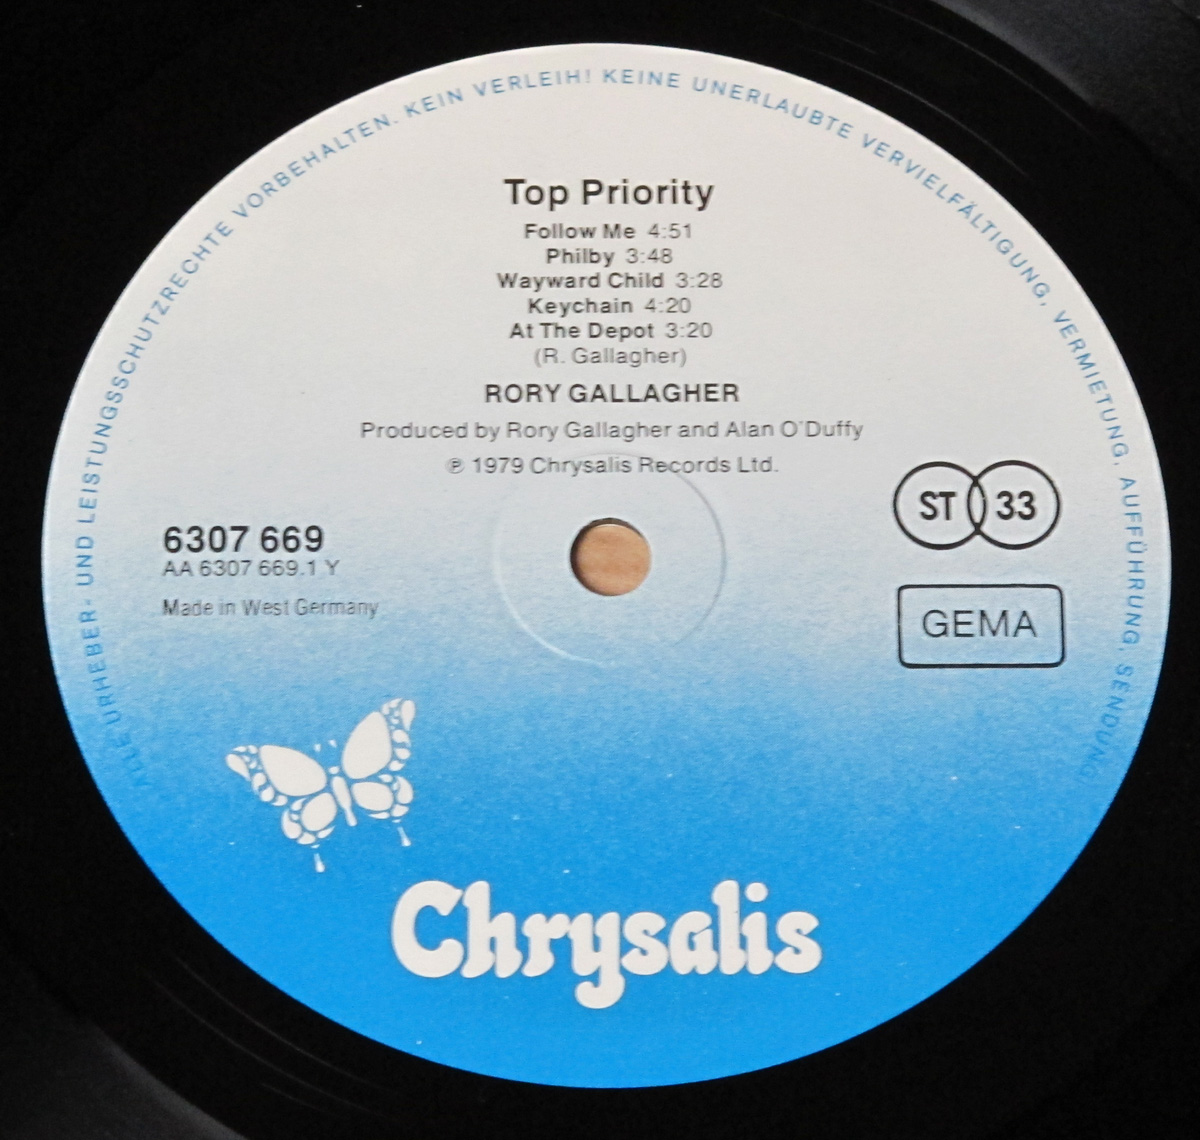 RORY GALLAGHER - Top Priority album's cover